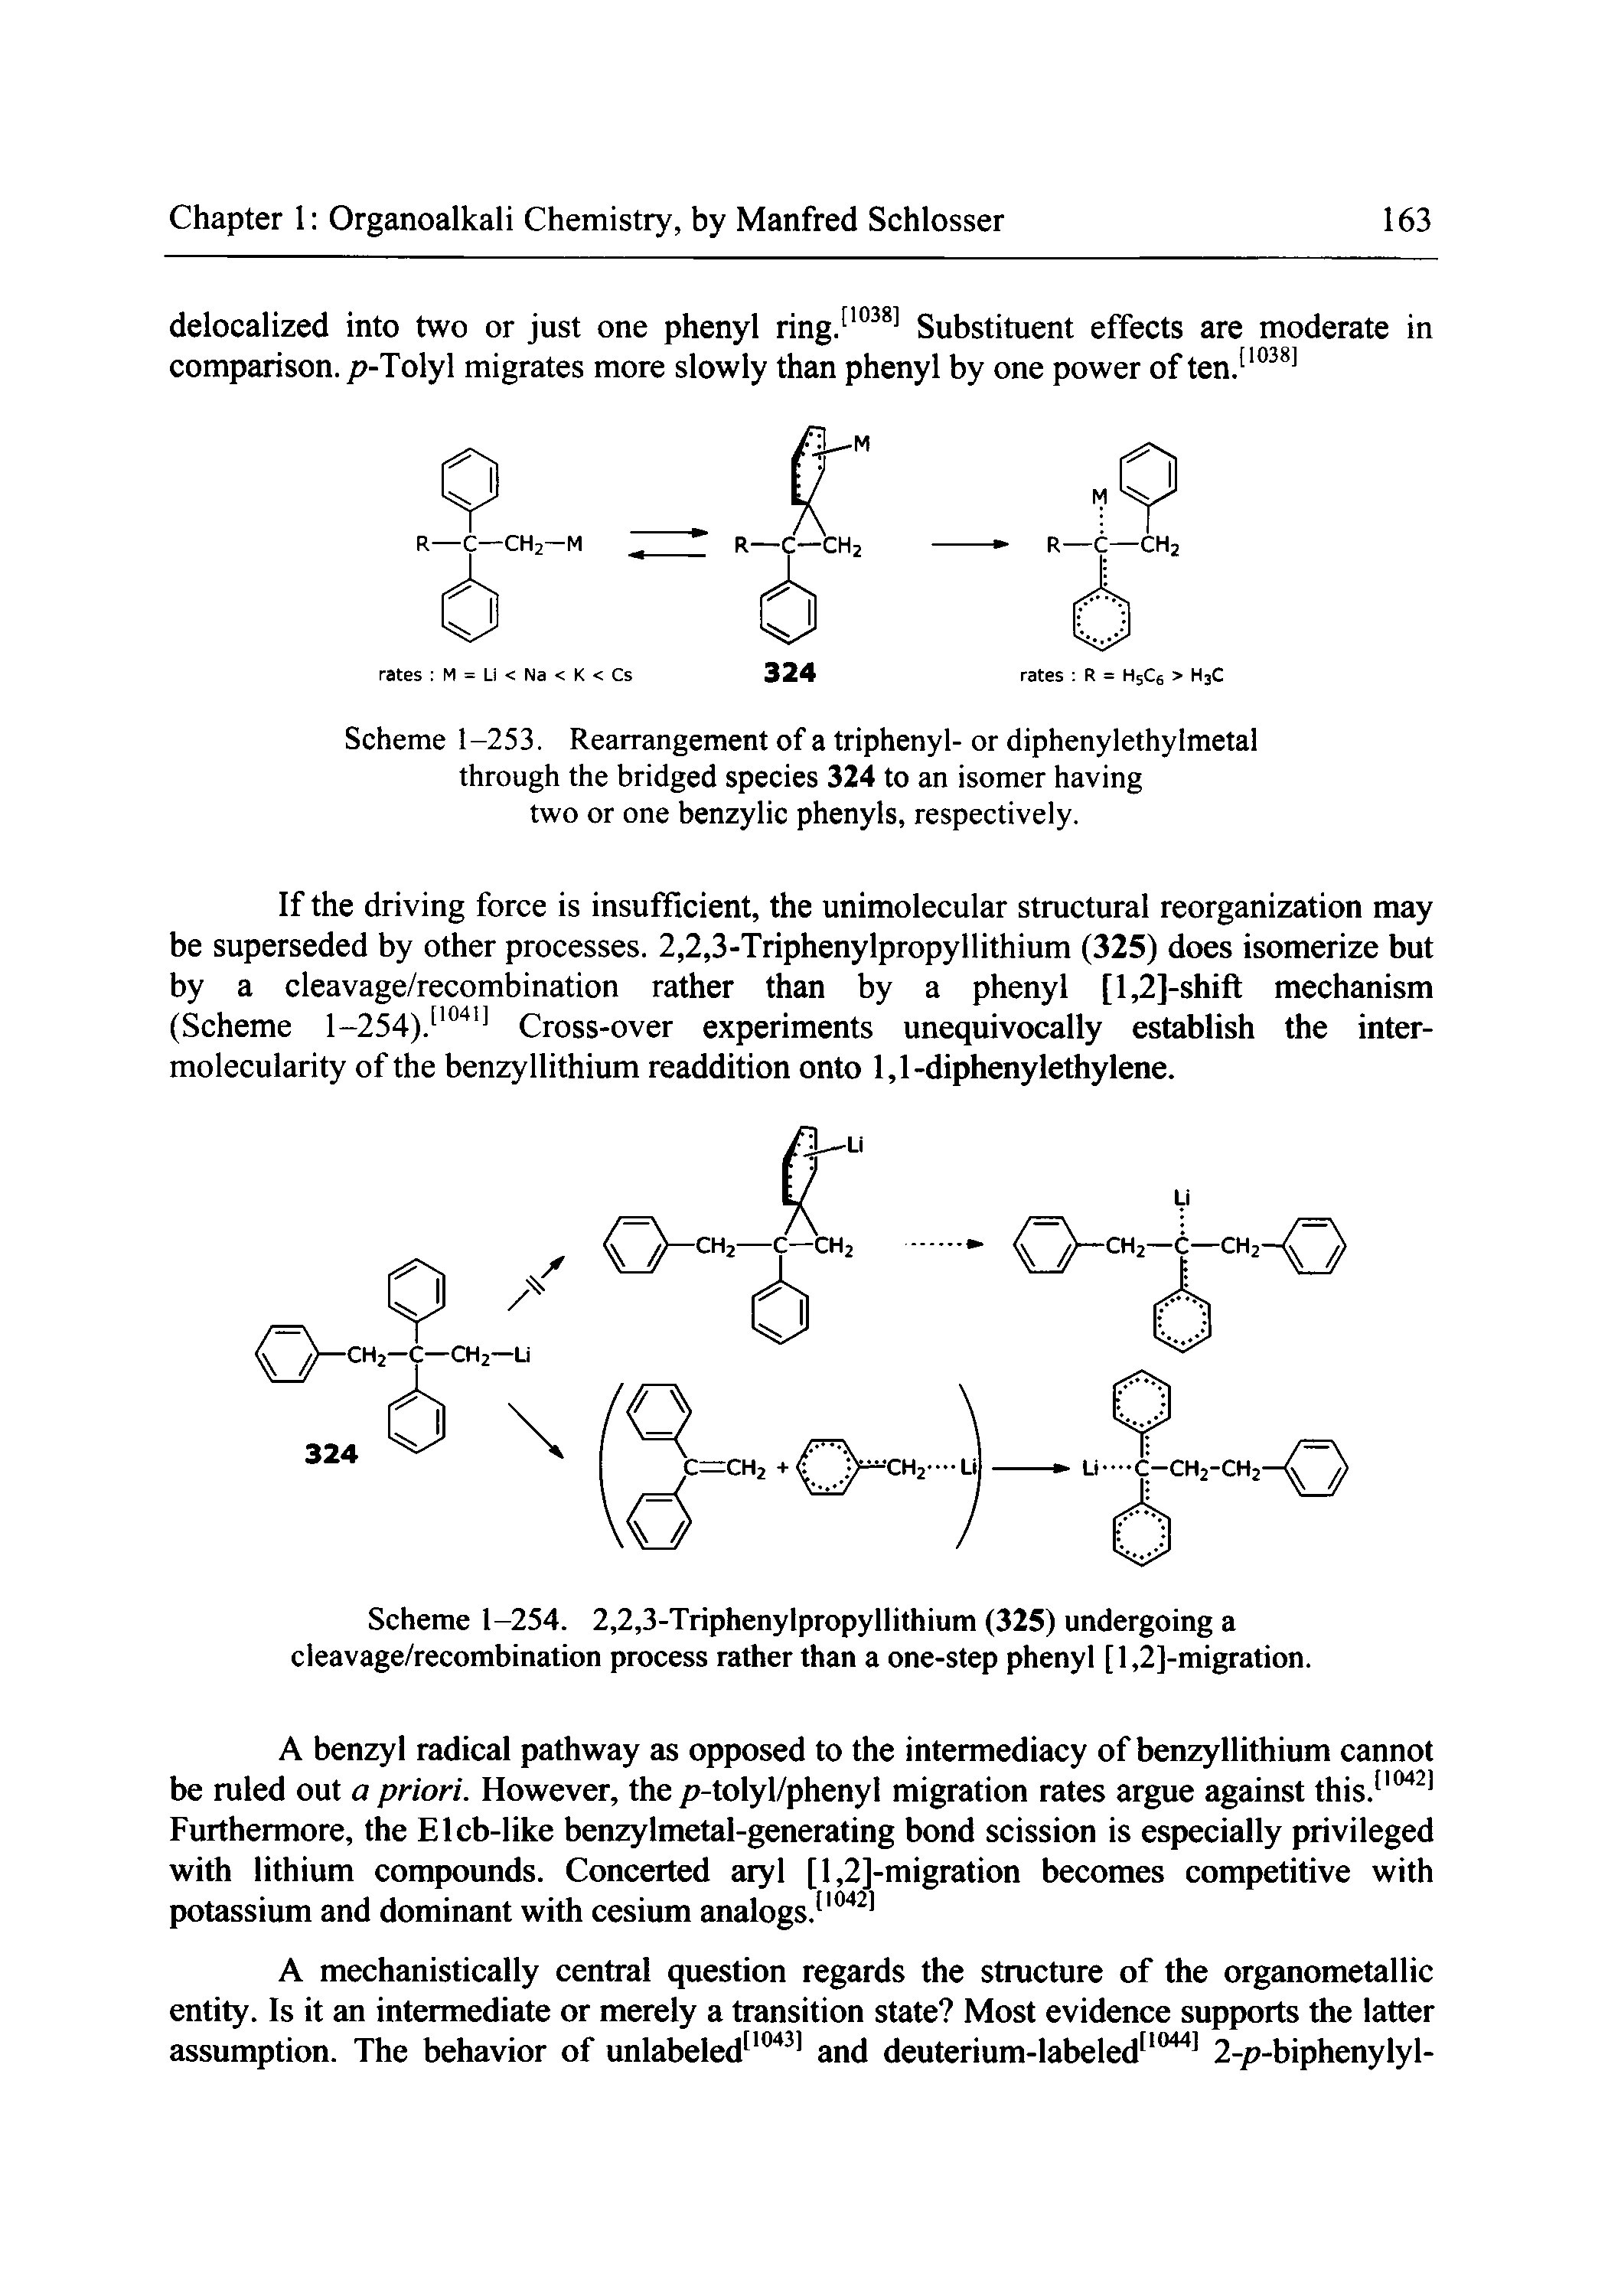 Scheme 1-254. 2,2,3-Triphenylpropyllithium (325) undergoing a cleavage/recombination process rather than a one-step phenyl [l,2]-migration.